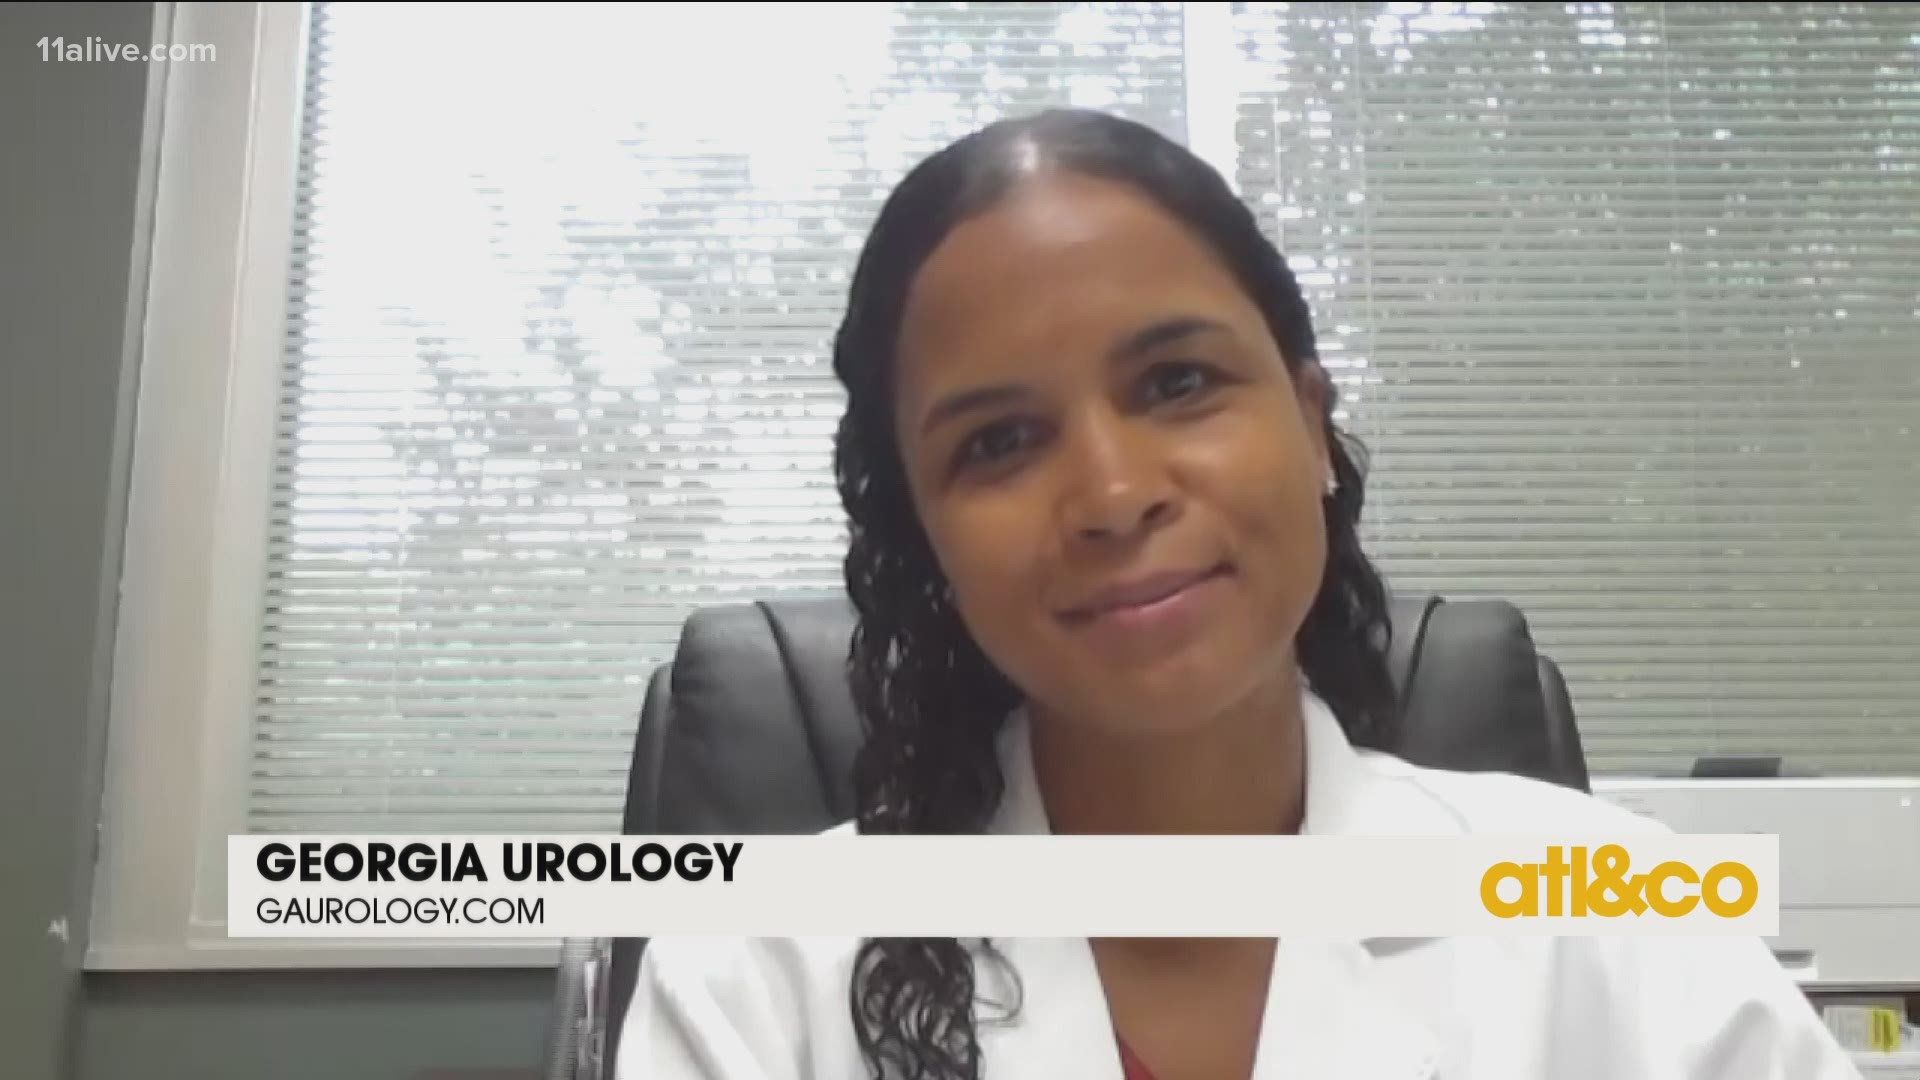 About 190,000 men are diagnosed with prostate cancer each year. Dr. Lambda Msezane from Georgia Urology talks about immunotherapy treatment on A&C.